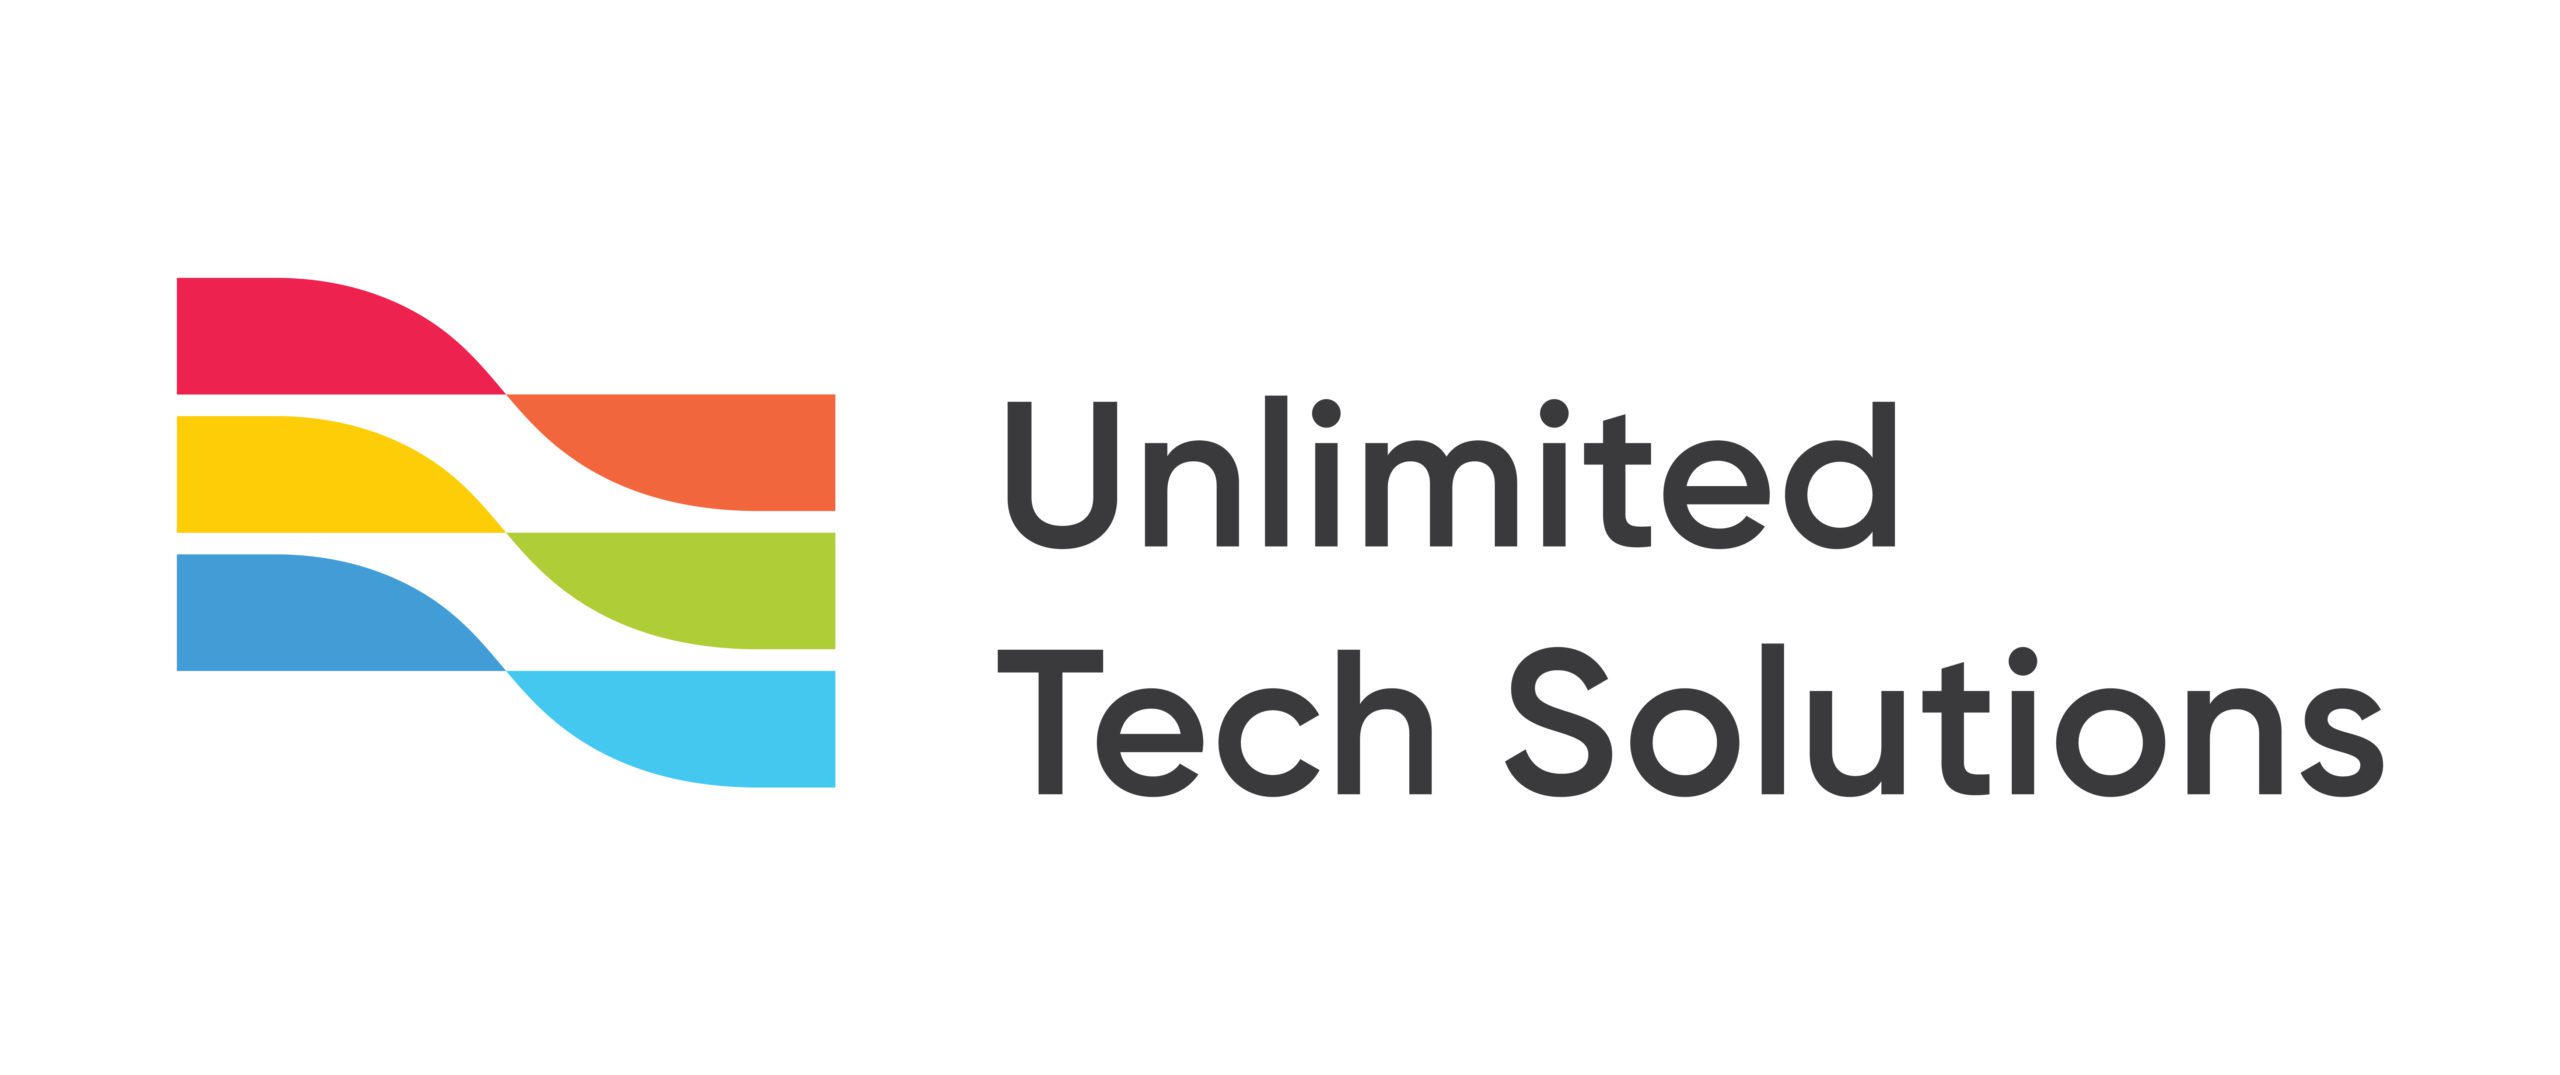 Unlimited Tech Solutions